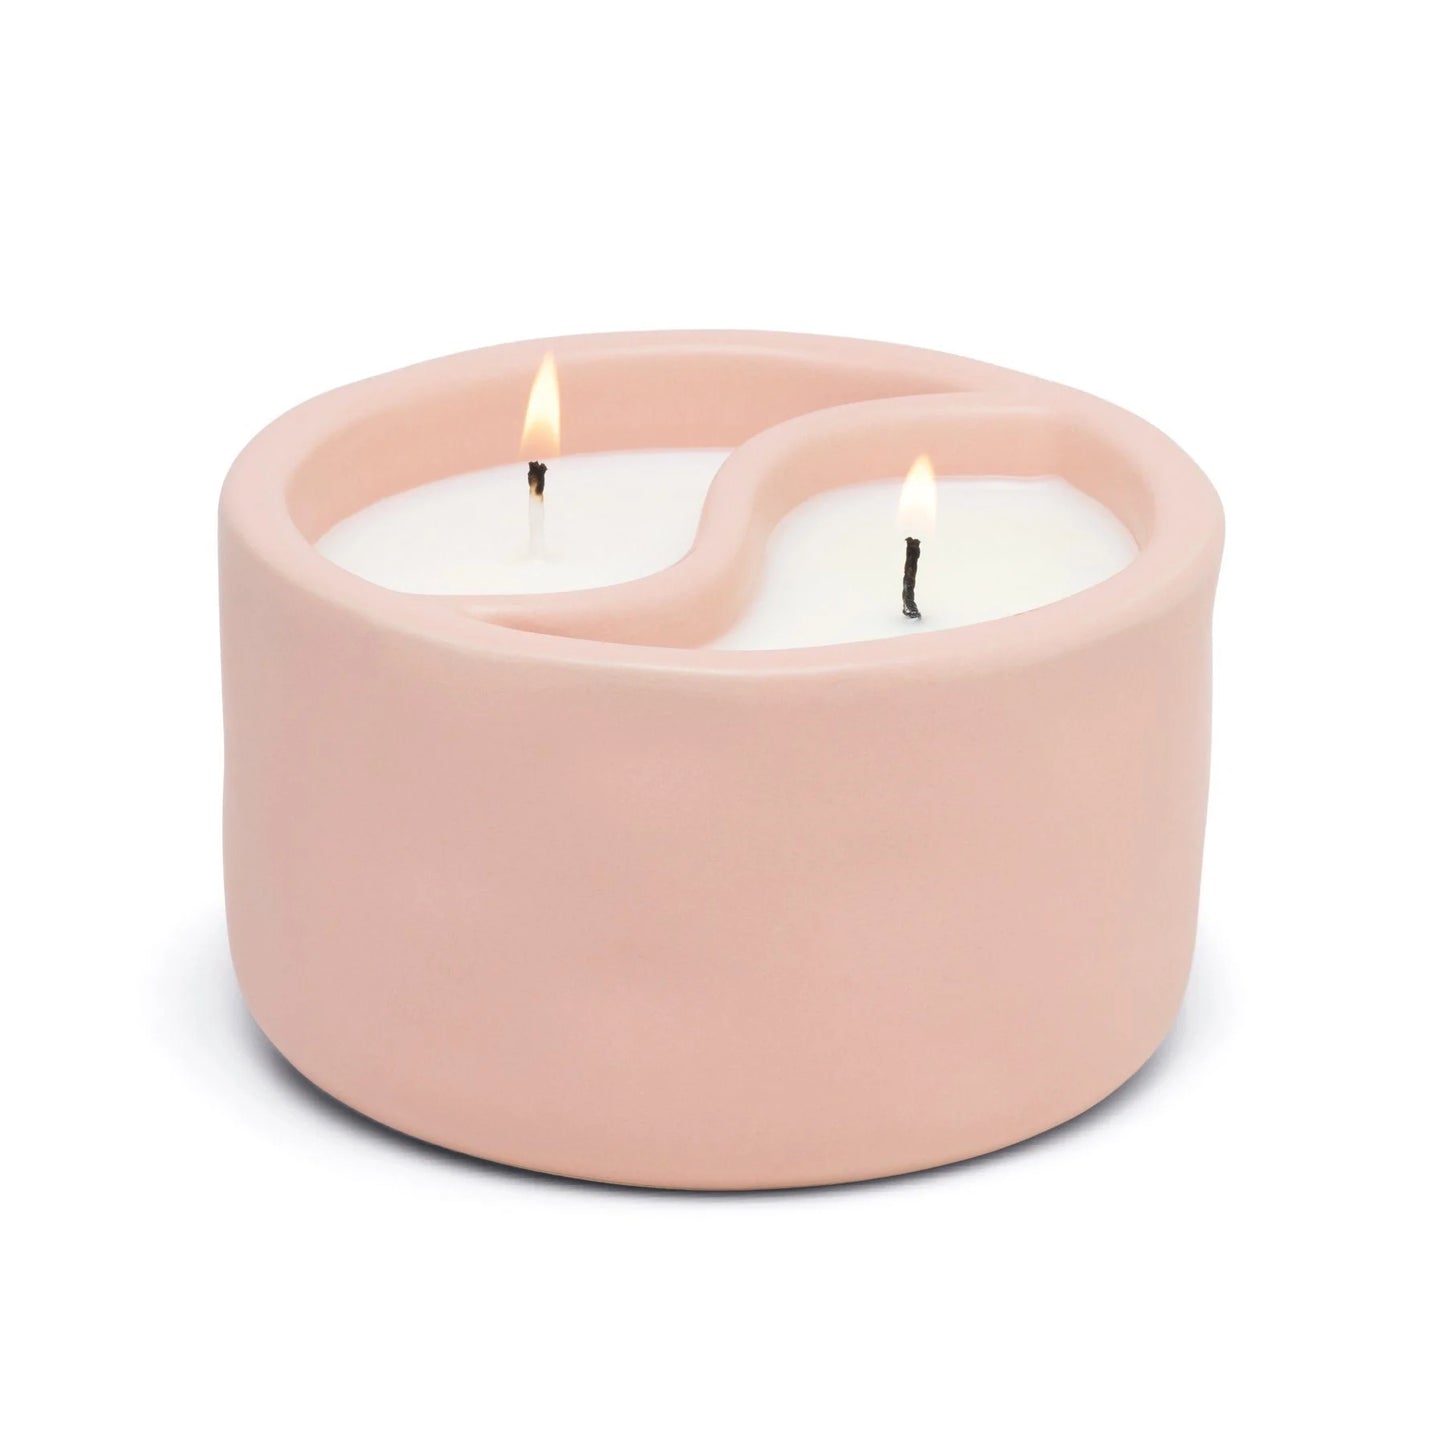 Dusty Pink Yin-Yang Candle - Cactus Flower + Watermint